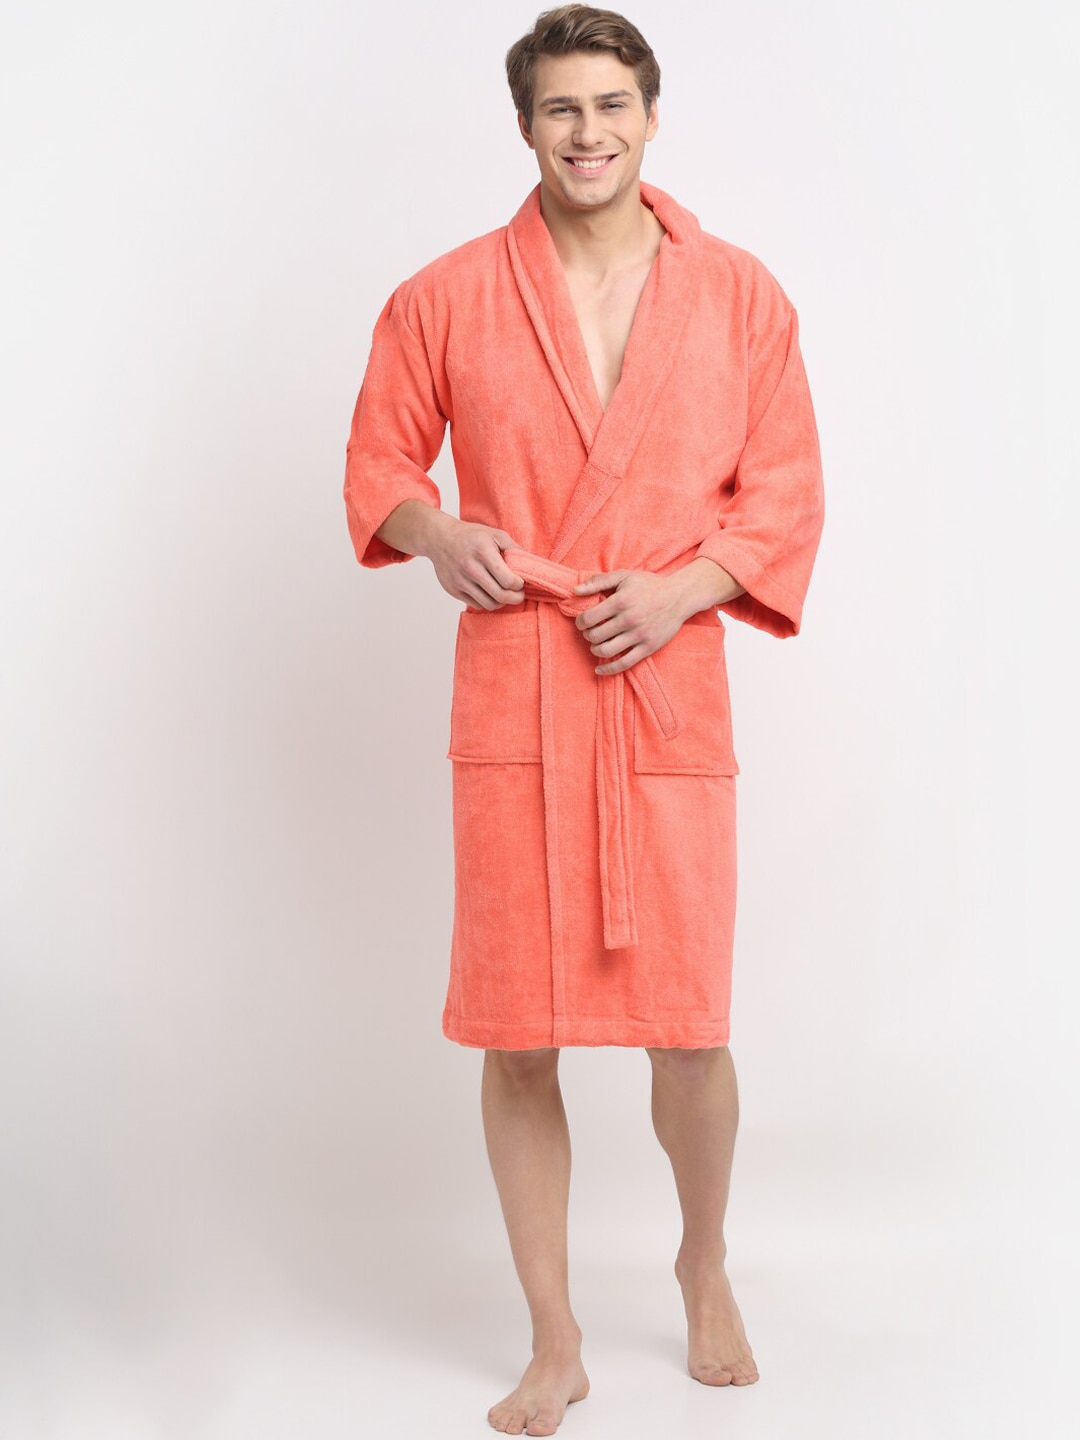 Creeva Unisex Coral-Coloured Solid Bath Robe With Pockets Price in India